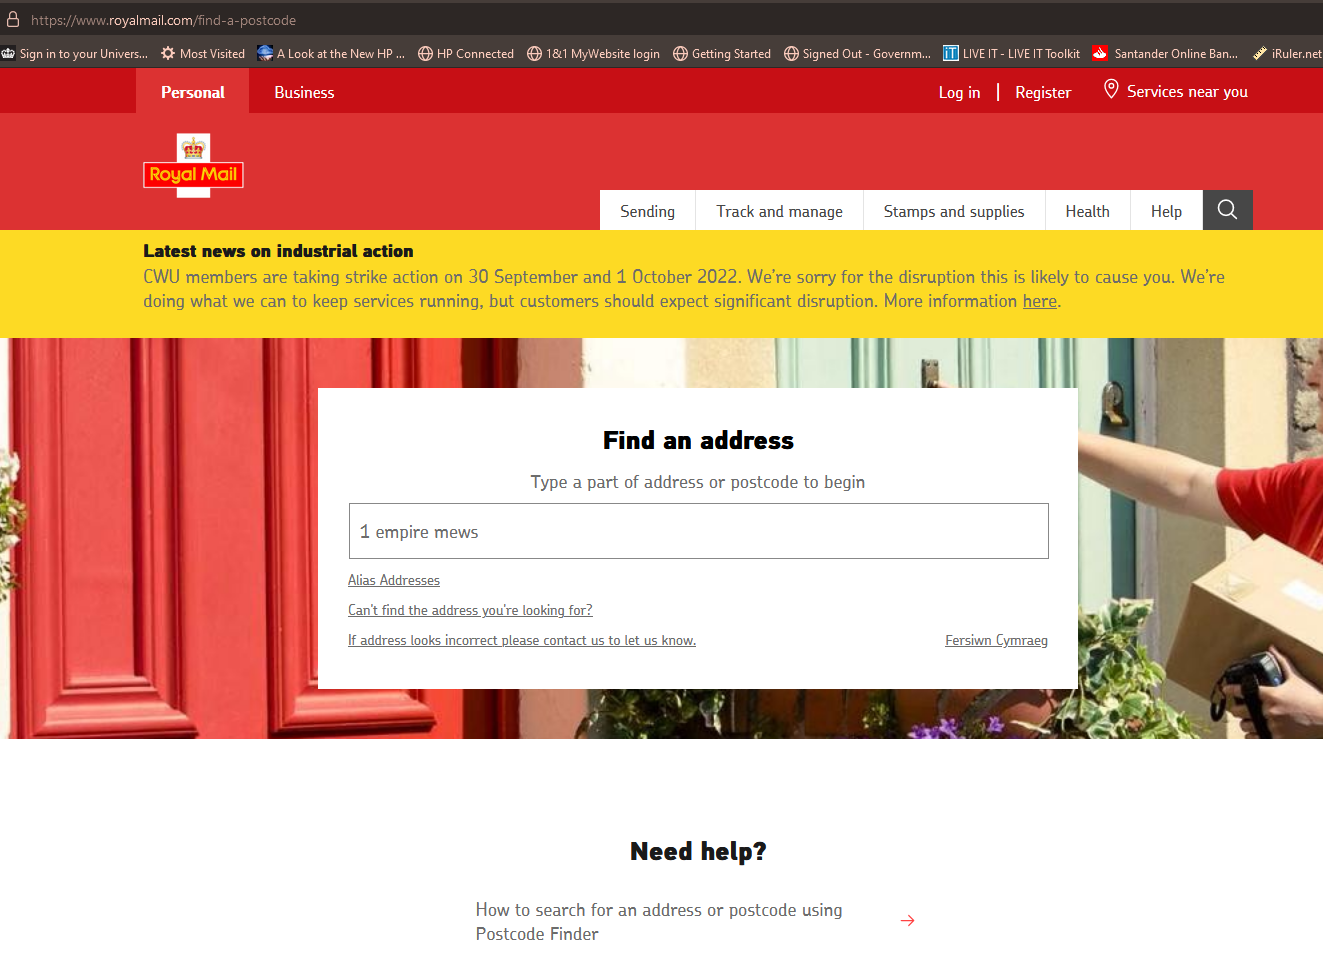 Picture of Royal Mail website for the Postcode finder service